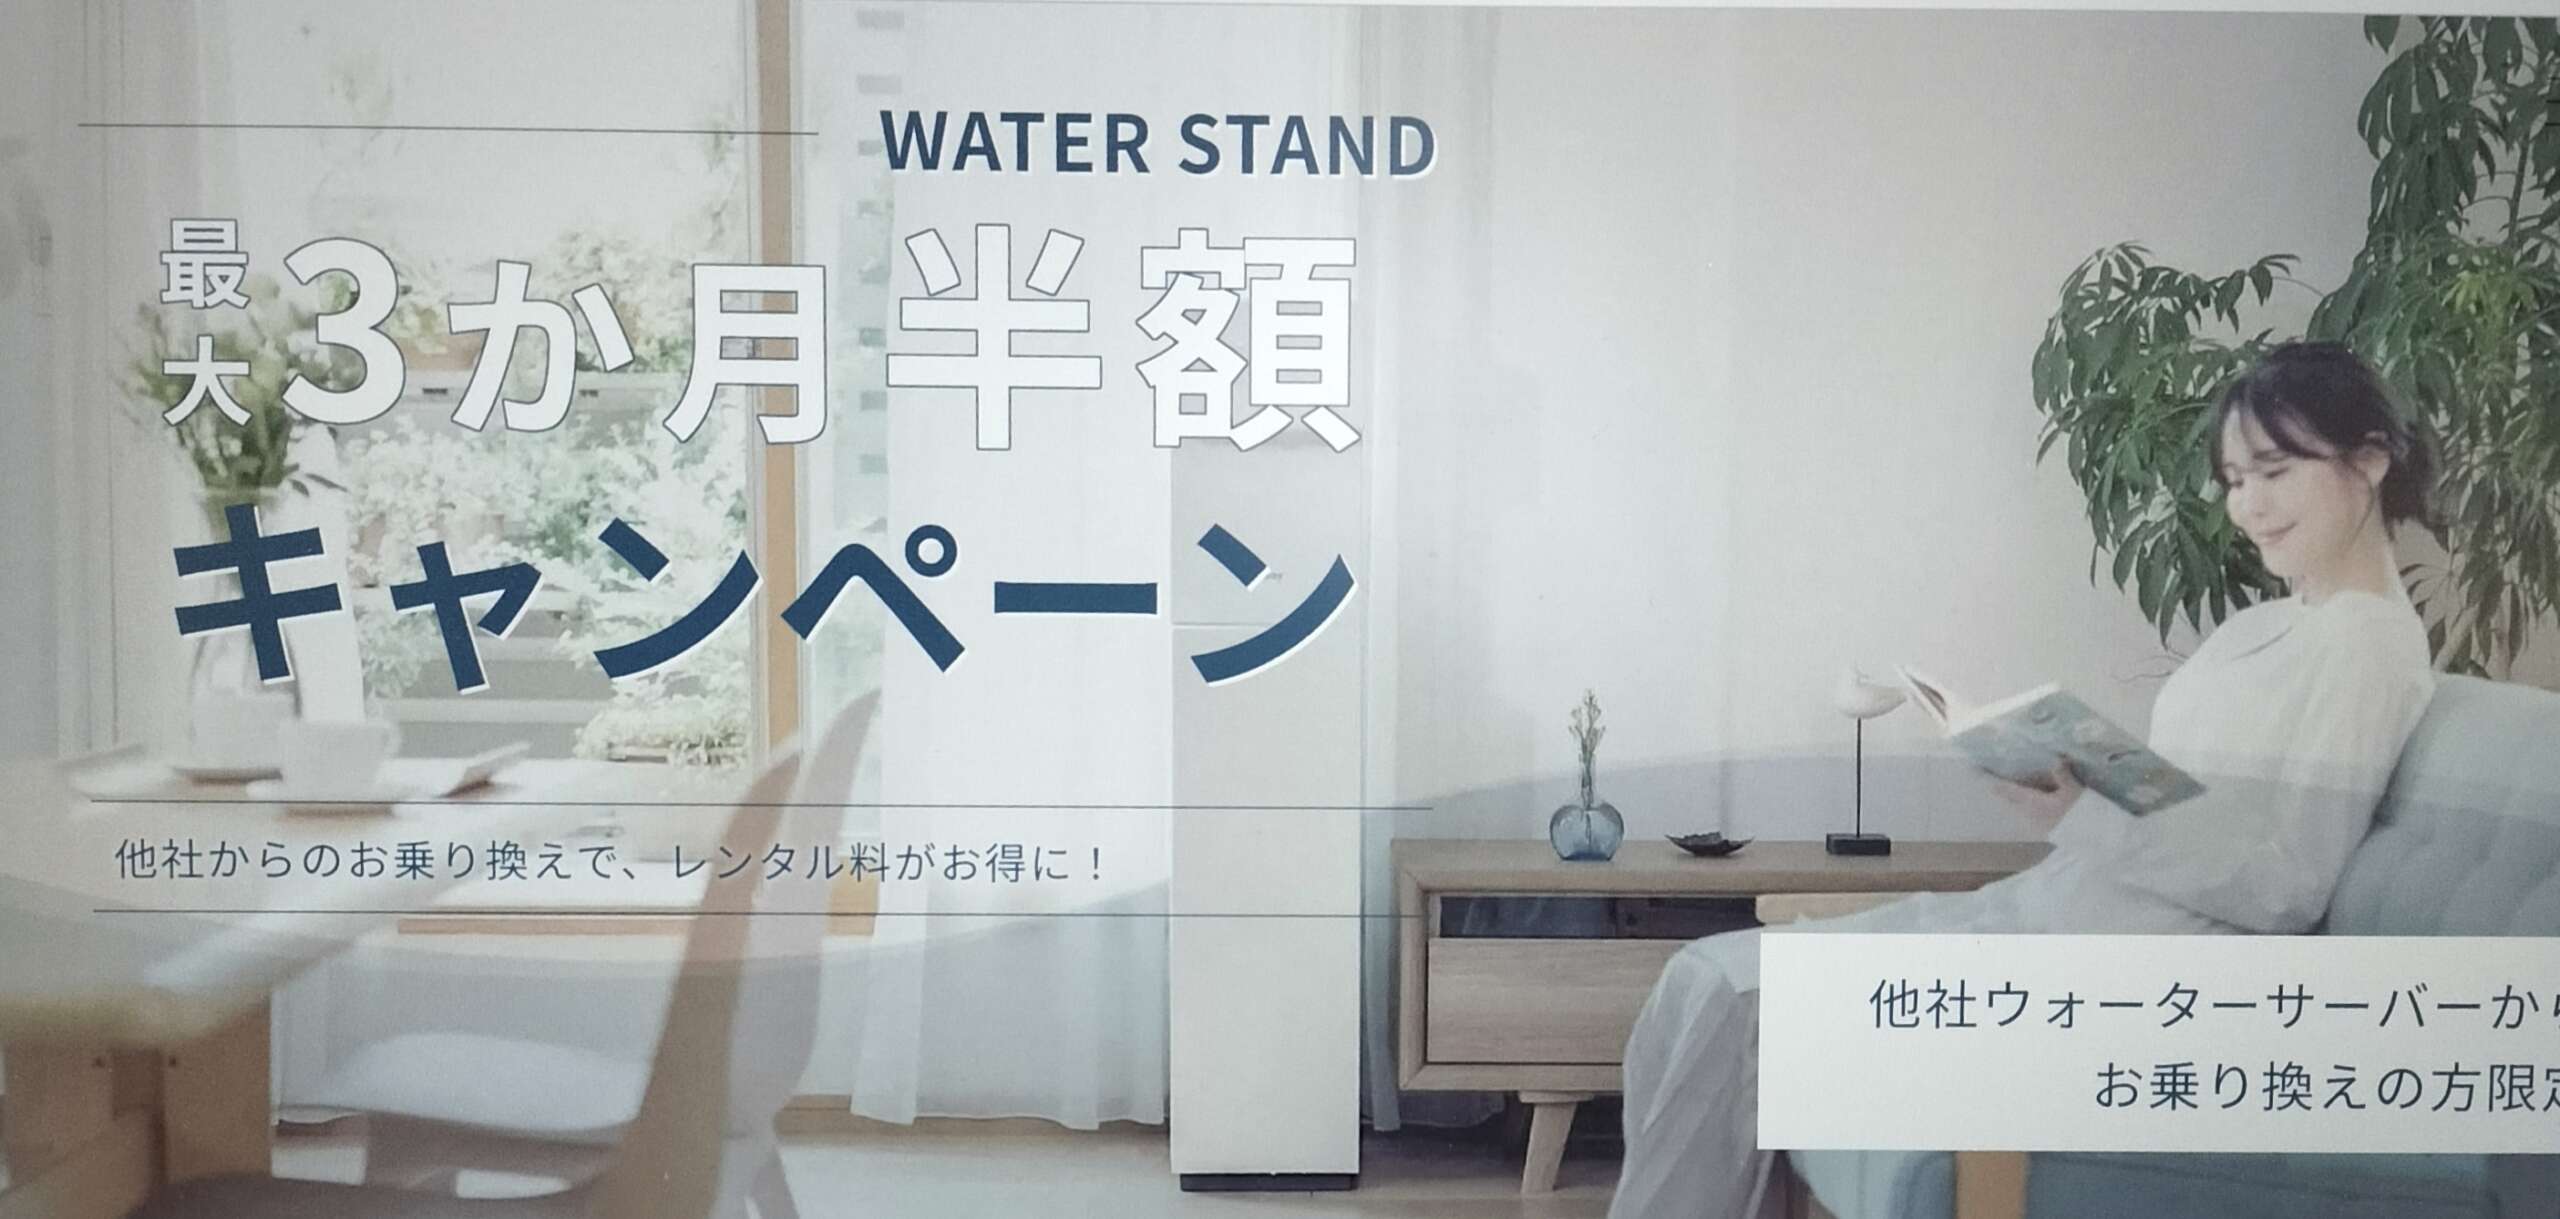 waterstand-campain